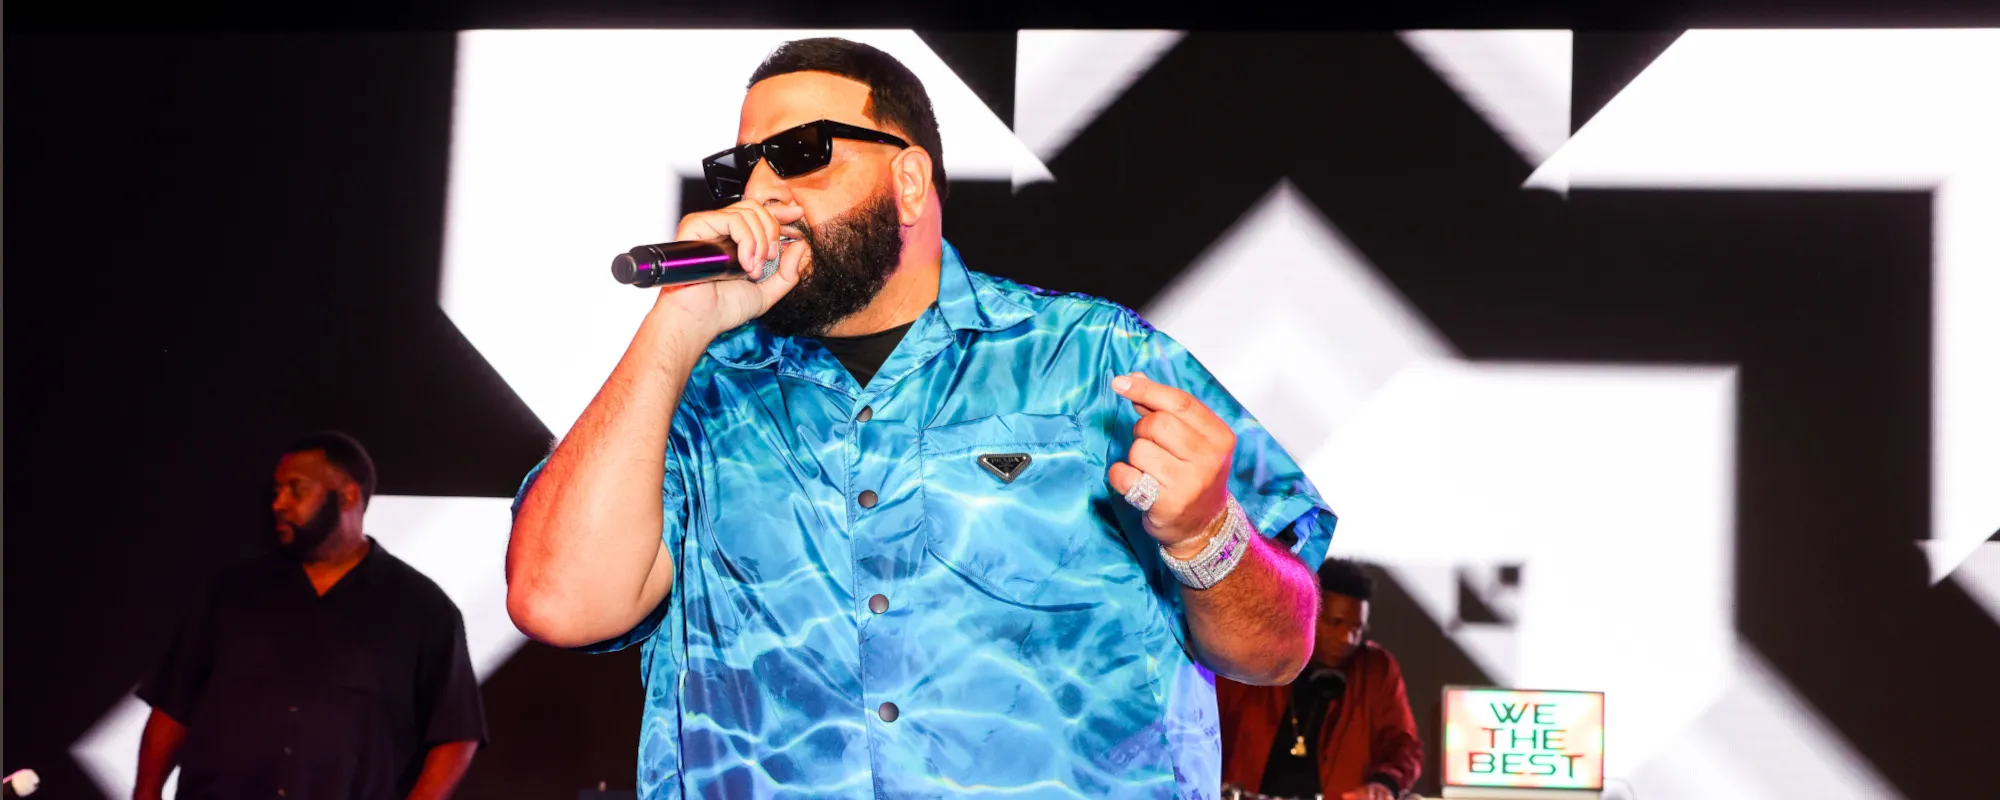 DJ Khaled Opens an Airbnb in His Shoe Closet: “This Could Be All You”